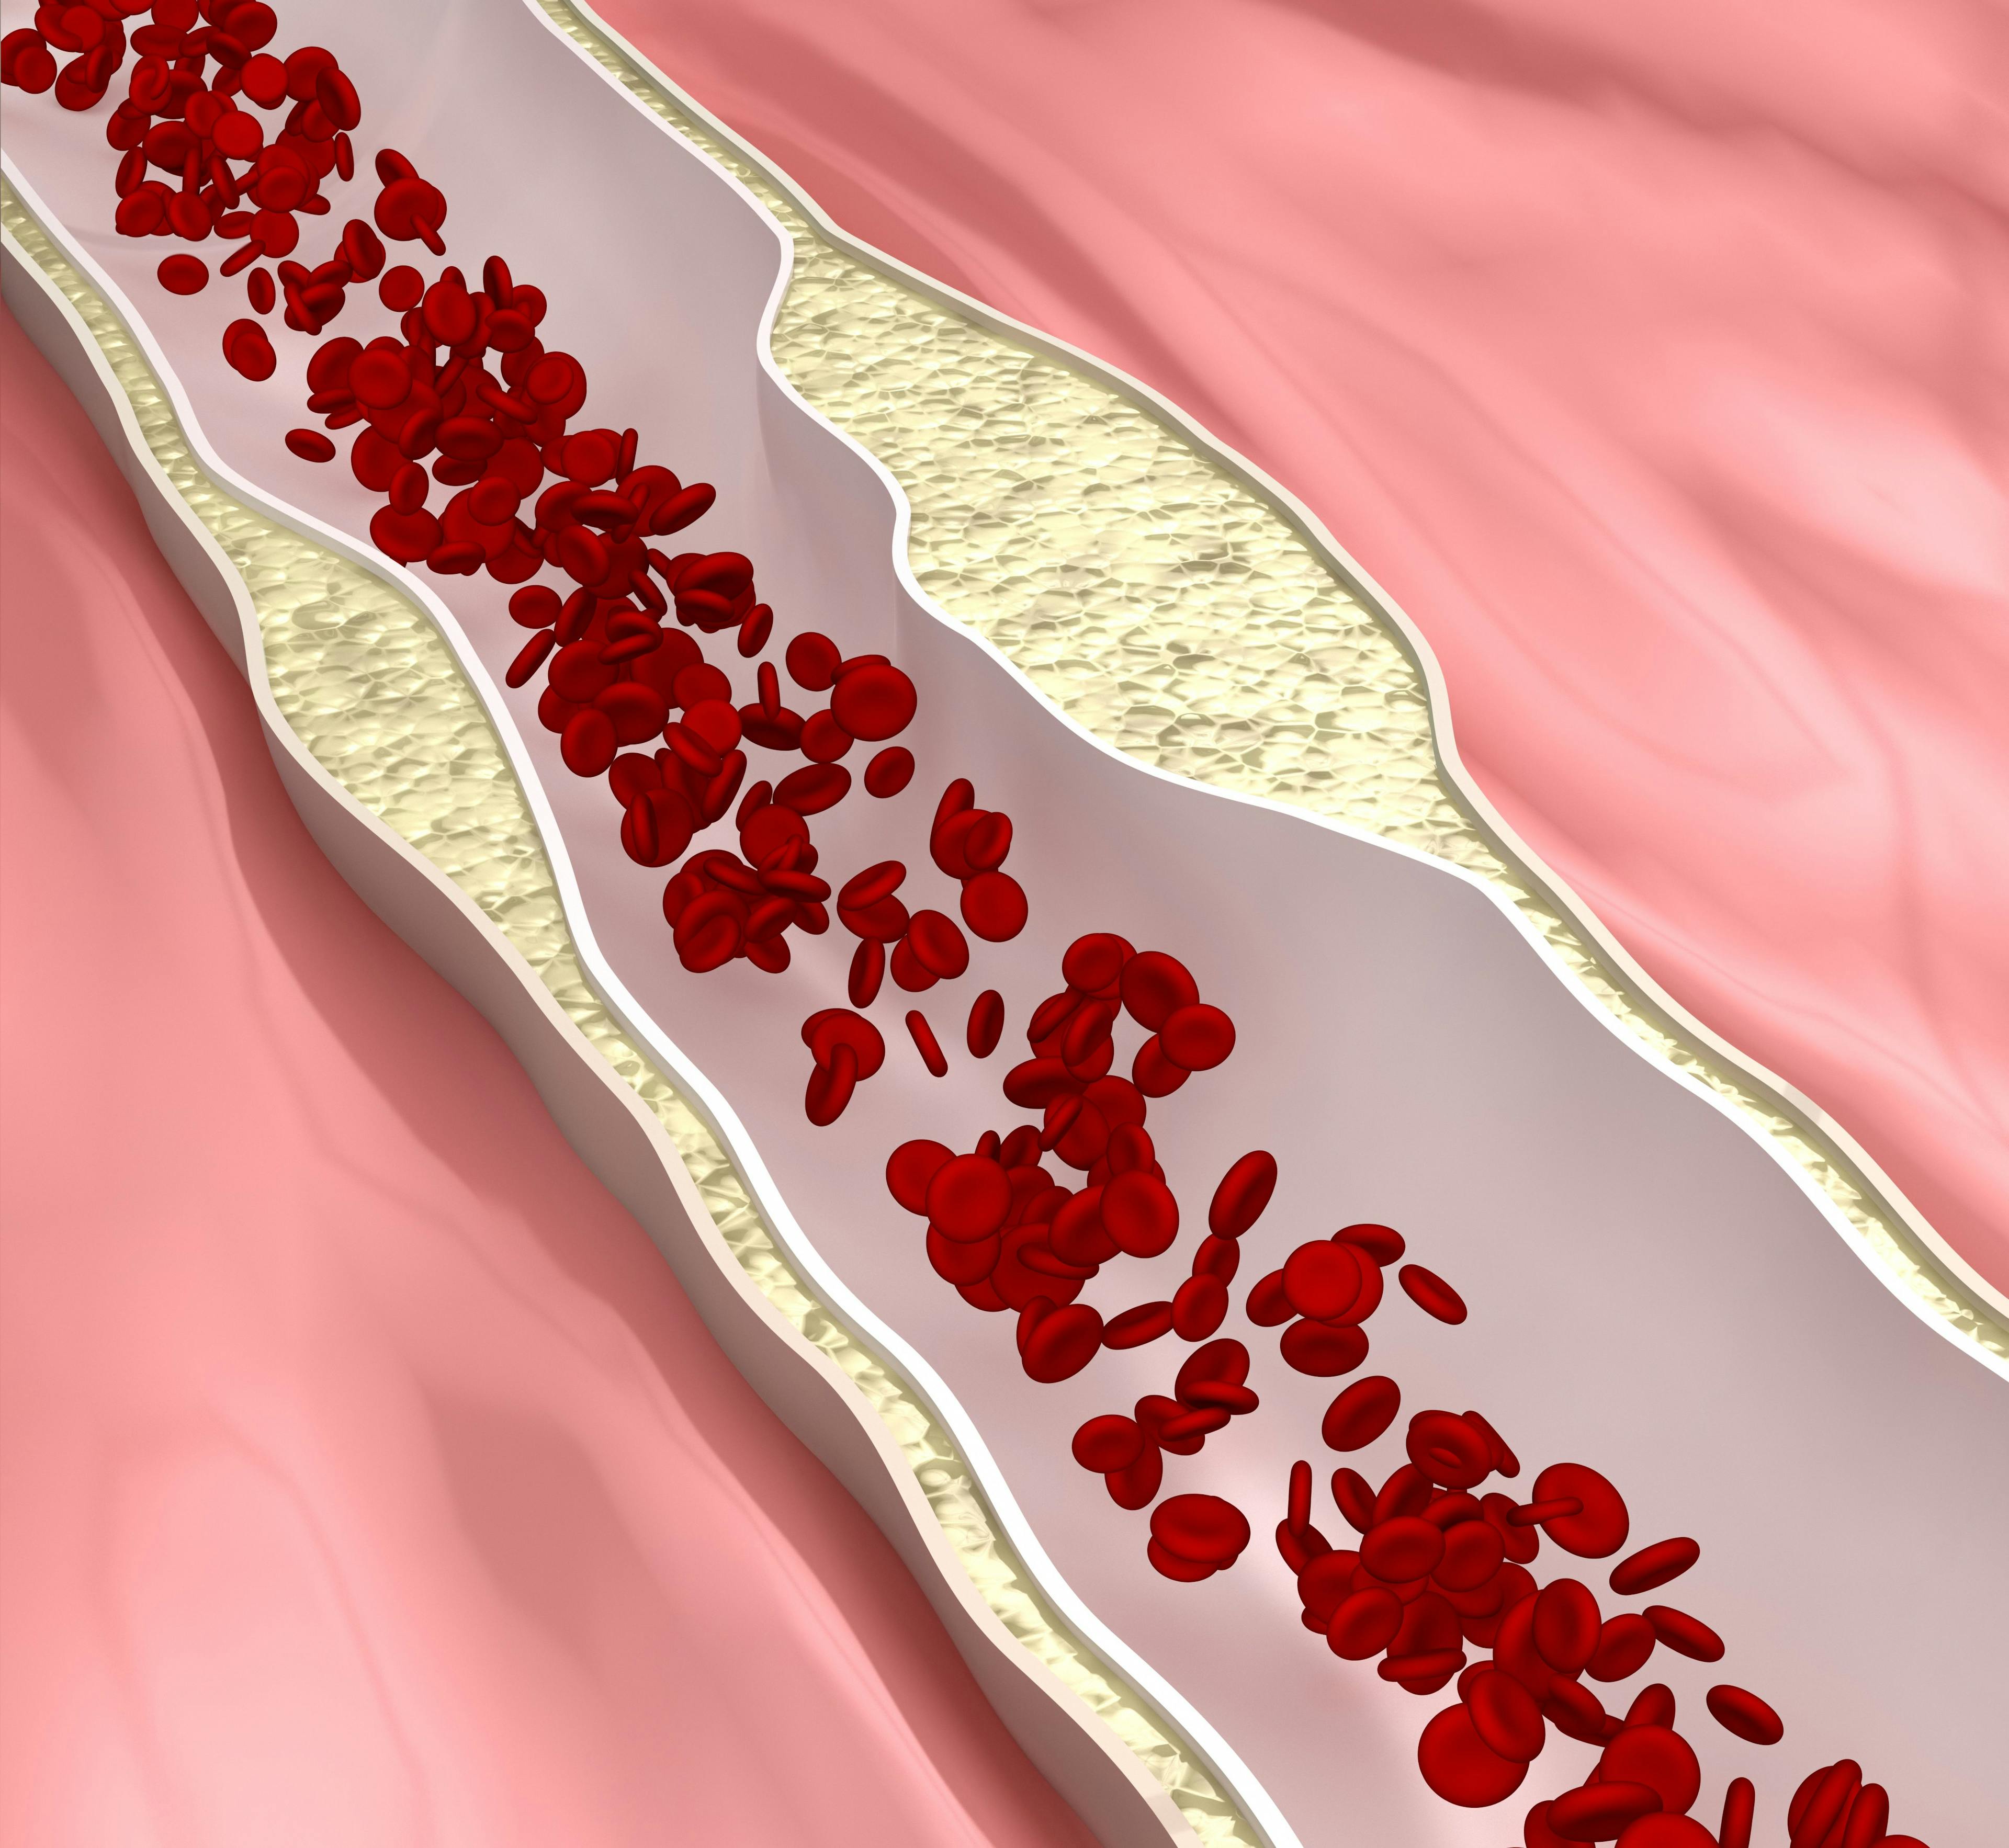 Patients With Fabry Likely Experience Accelerated Atherosclerosis, Study Finds